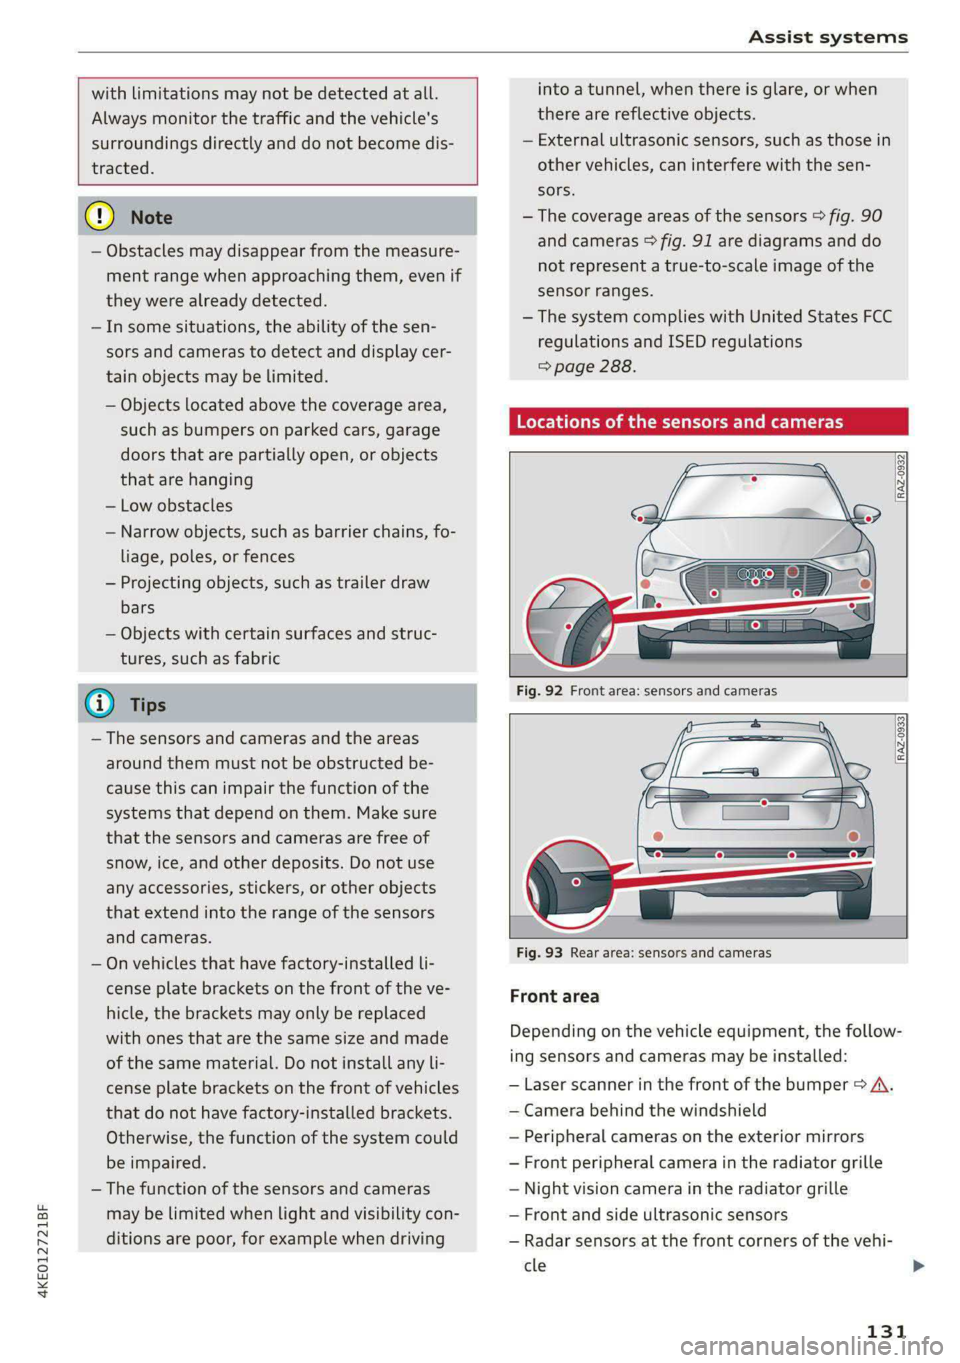 AUDI E-TRON 2021  Owners Manual 4KE012721BF 
Assist systems 
  
  
  
with limitations may not be detected at all. 
Always monitor the traffic and the vehicle's 
surroundings directly and do not become dis- 
tracted. 
    
@) No